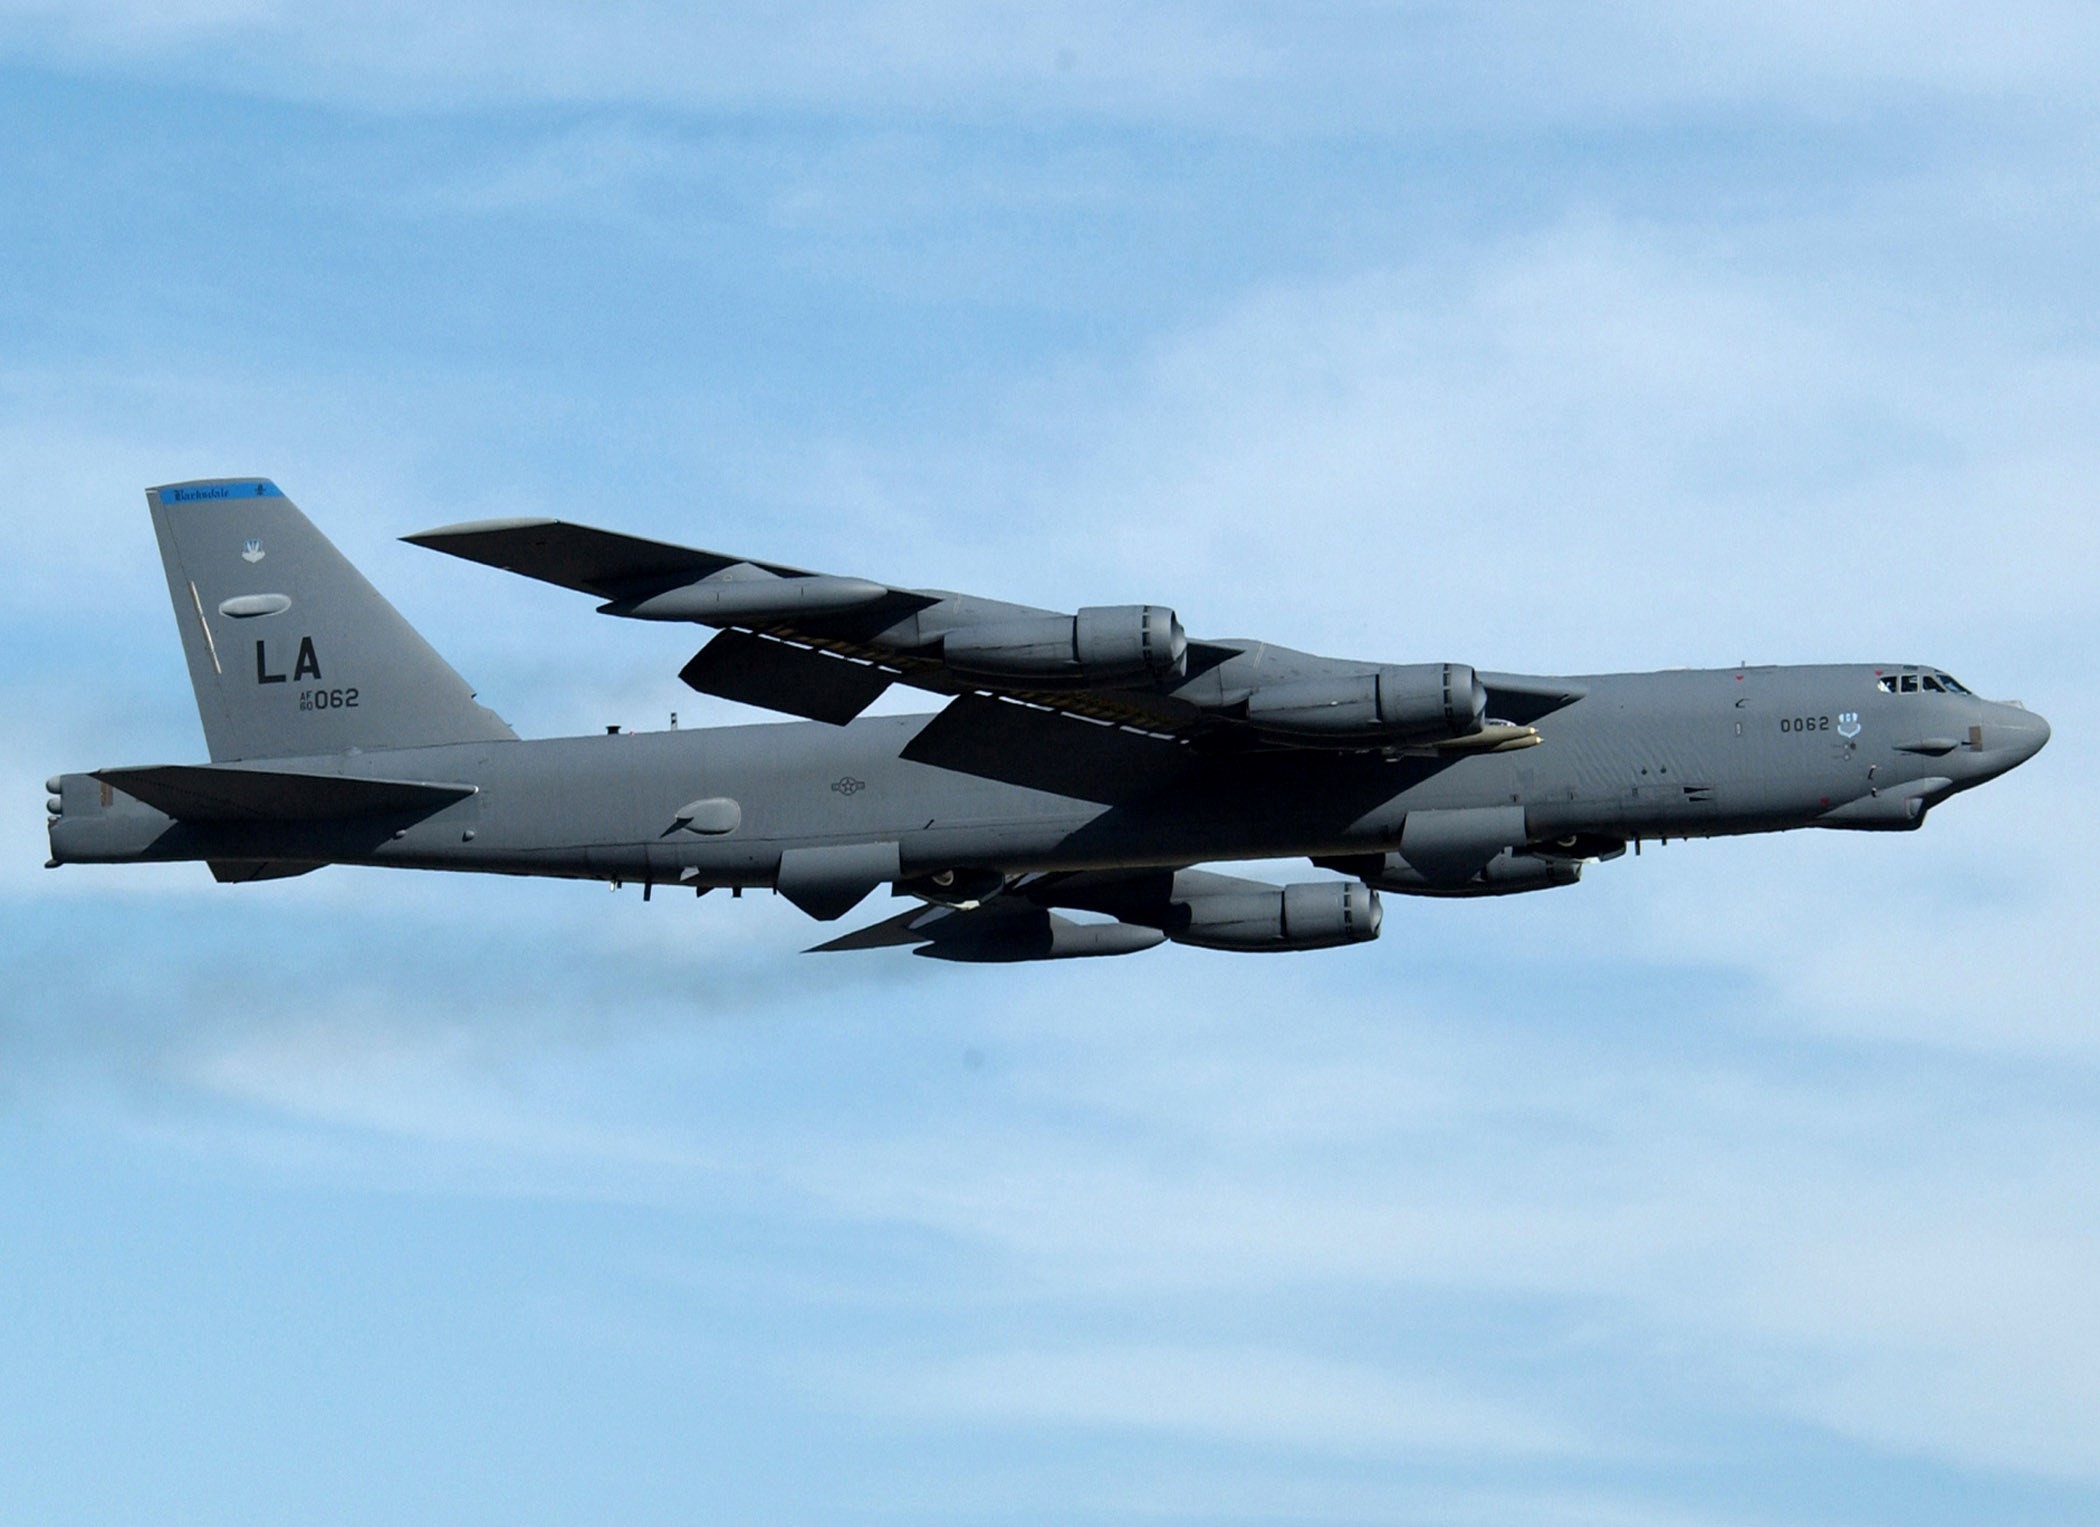 Boeing B-52 Stratofortress Wallpapers